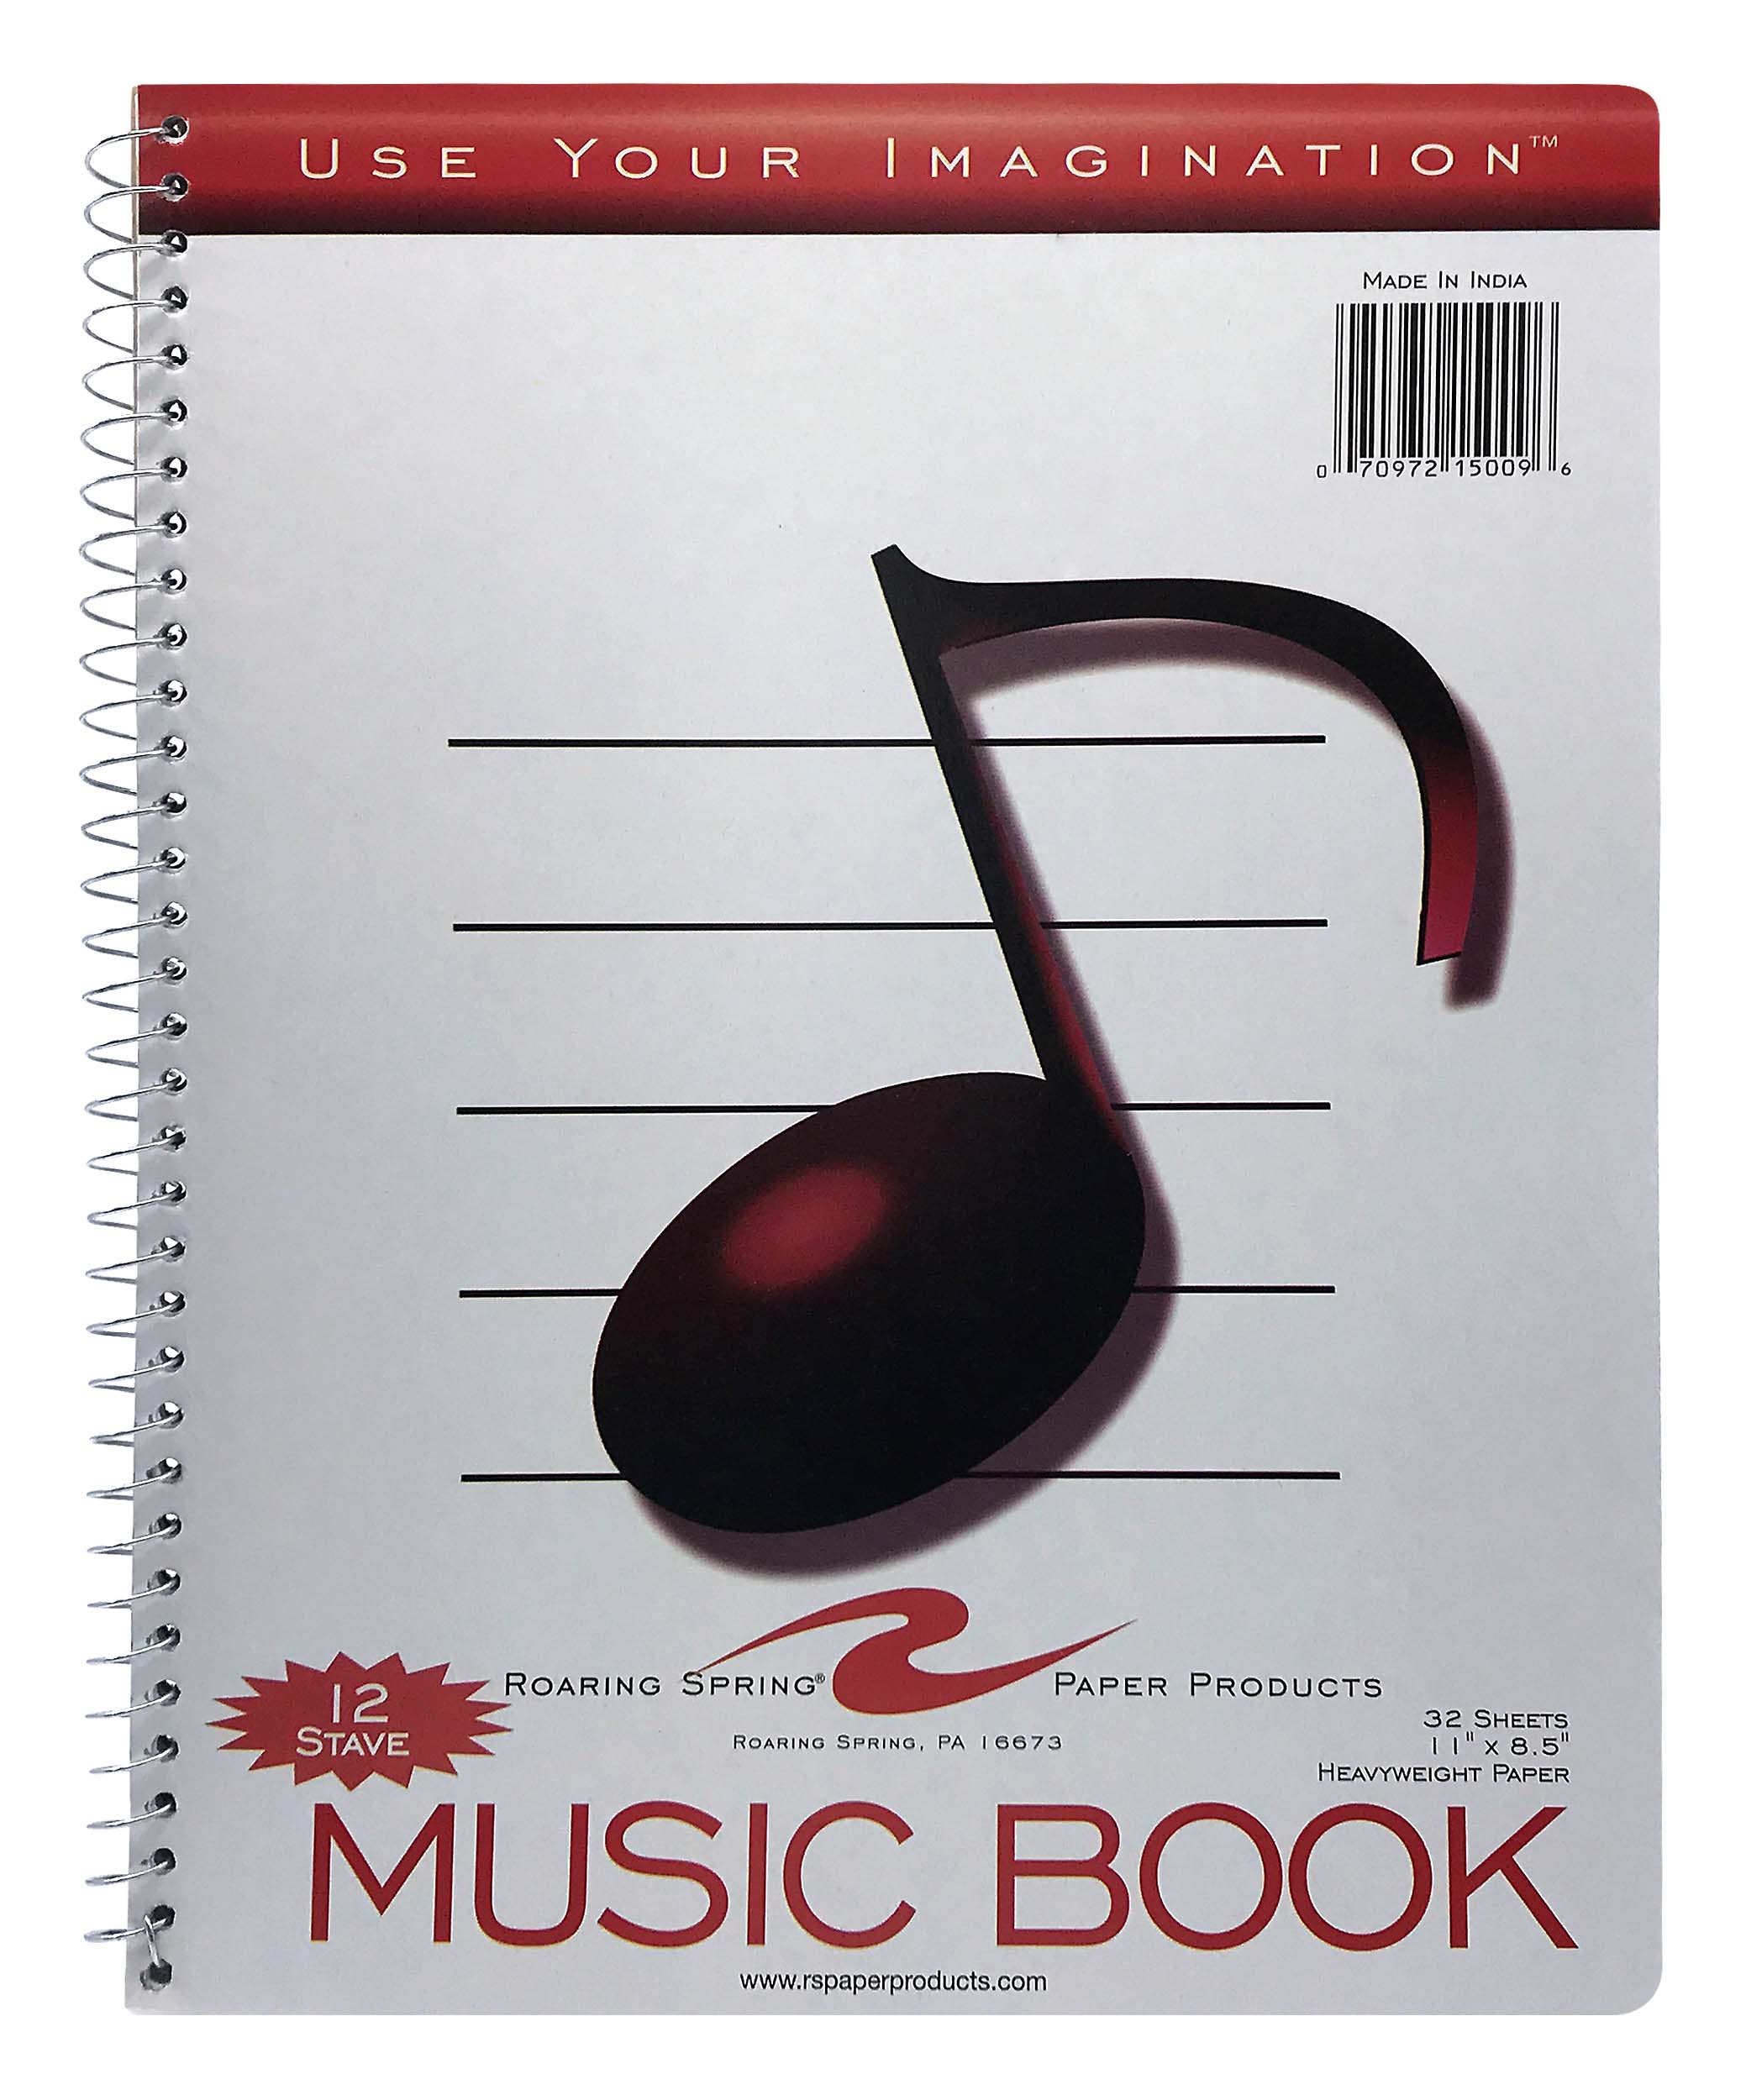 Roaring Spring Paper Products Music Book